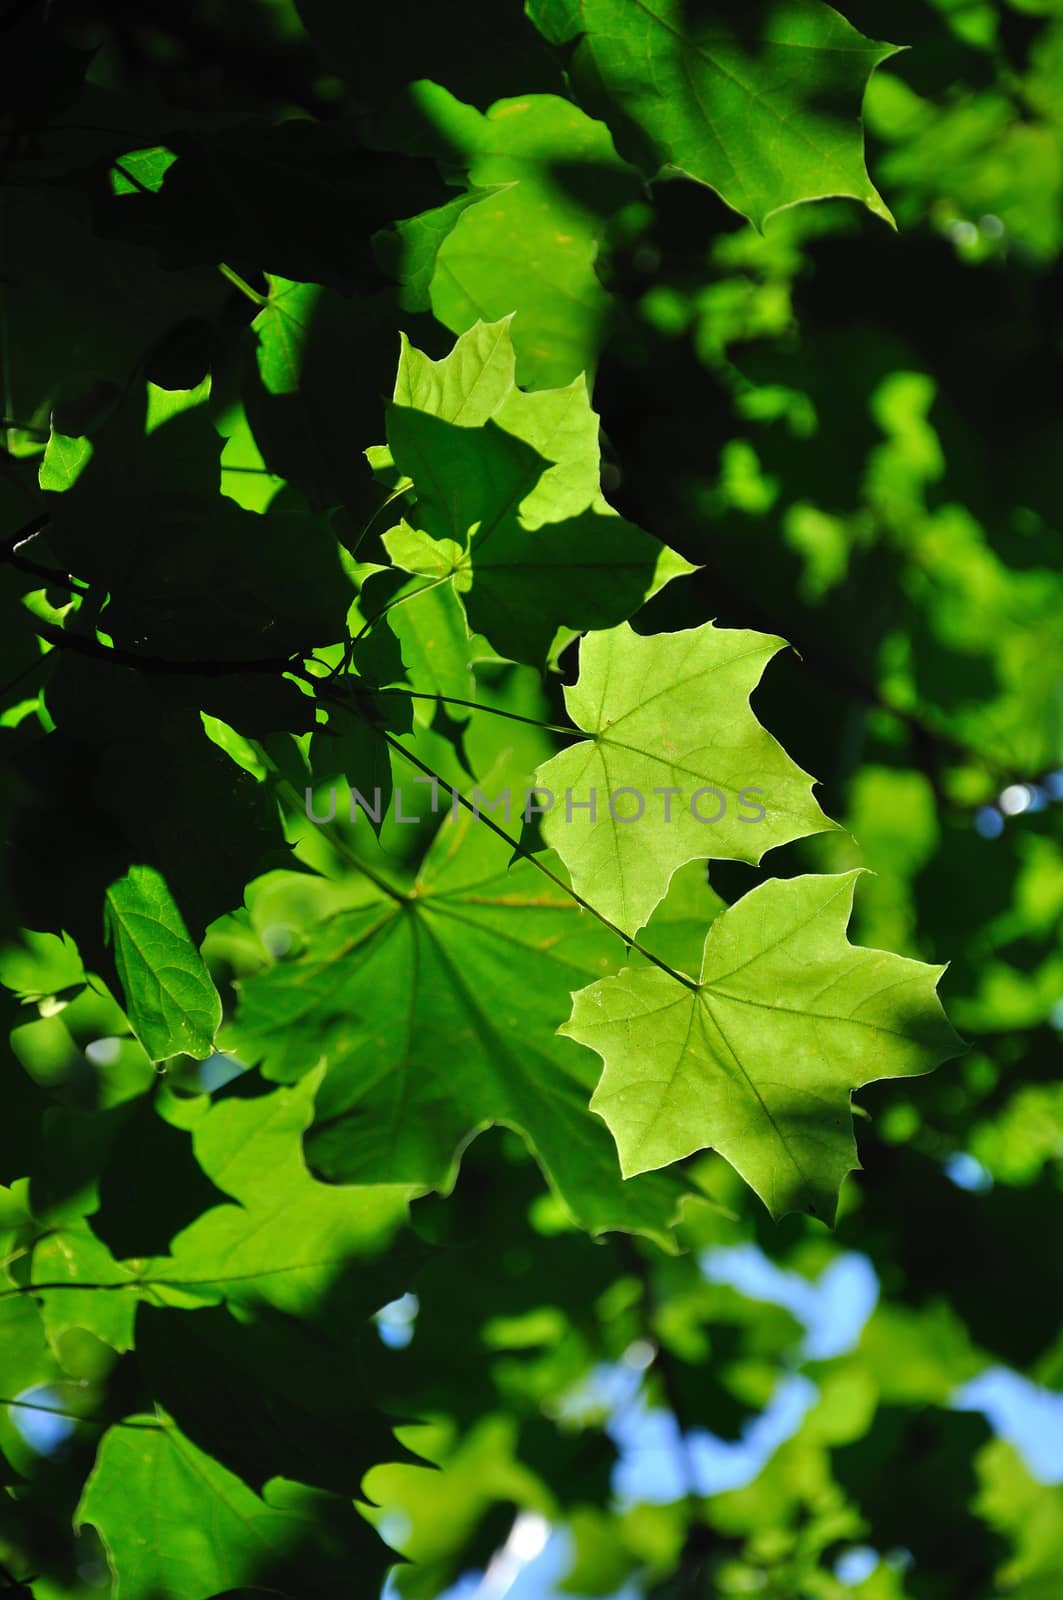 Colorful fresh green maple branch close-up, Sergiev Posad, Moscow region, Russia